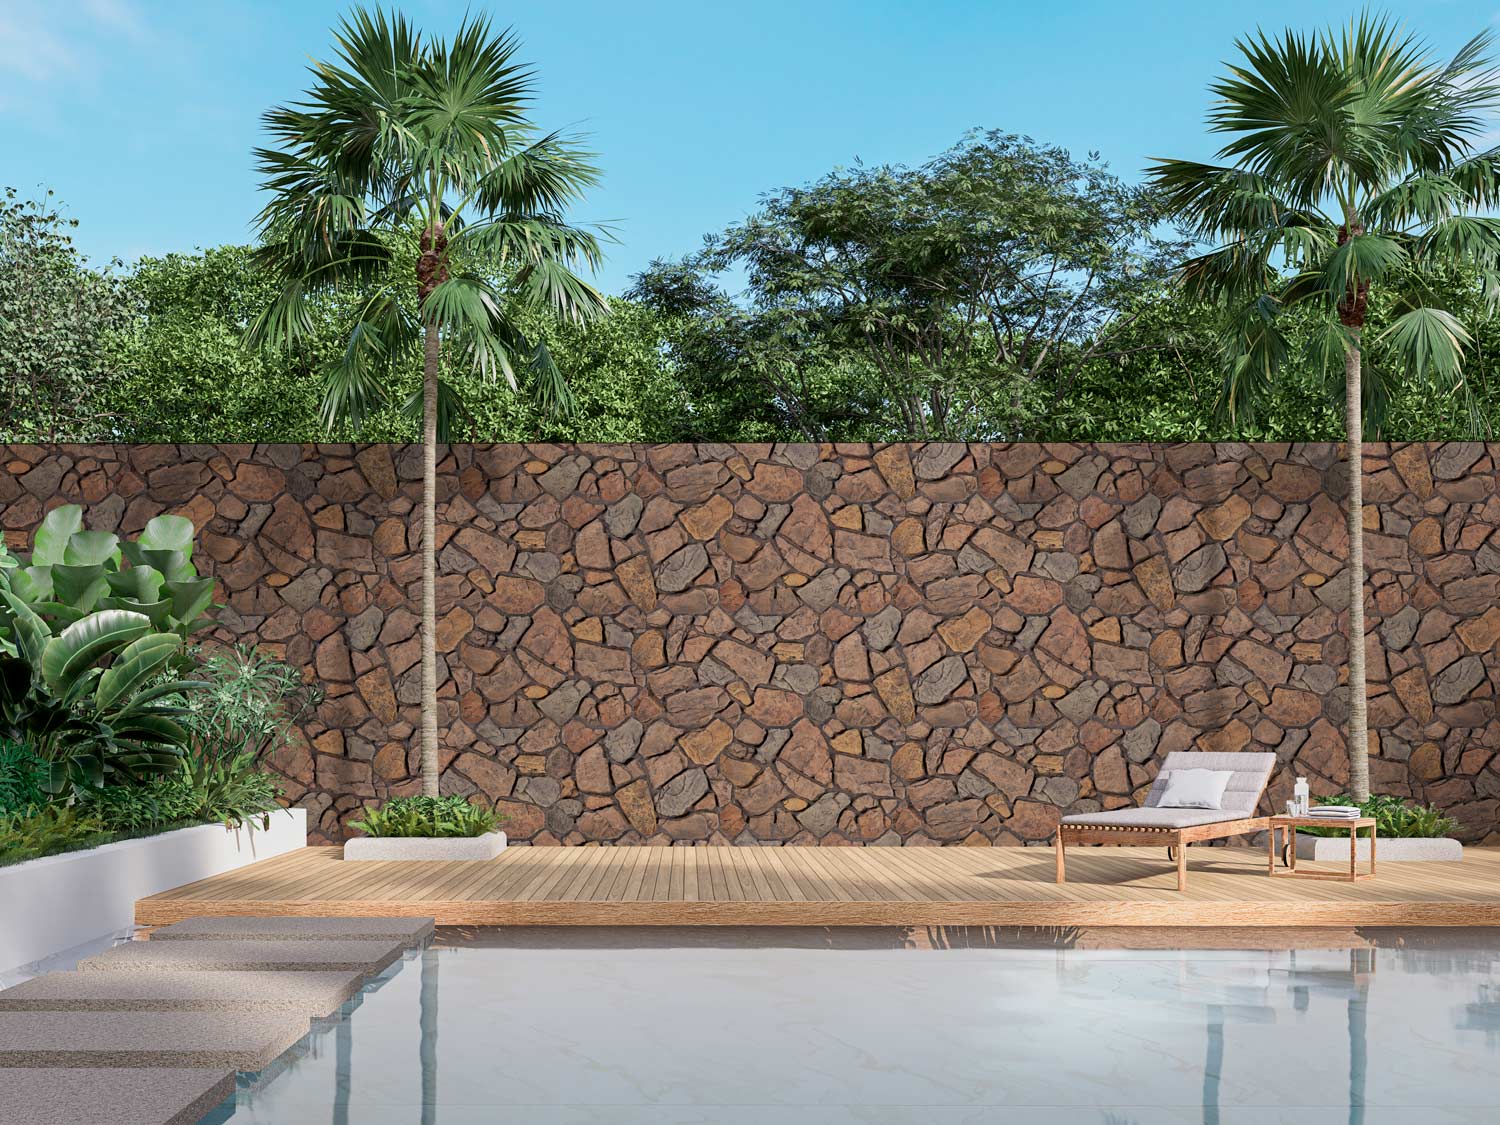 Faux stone panels create a natural, warm look by the pool.